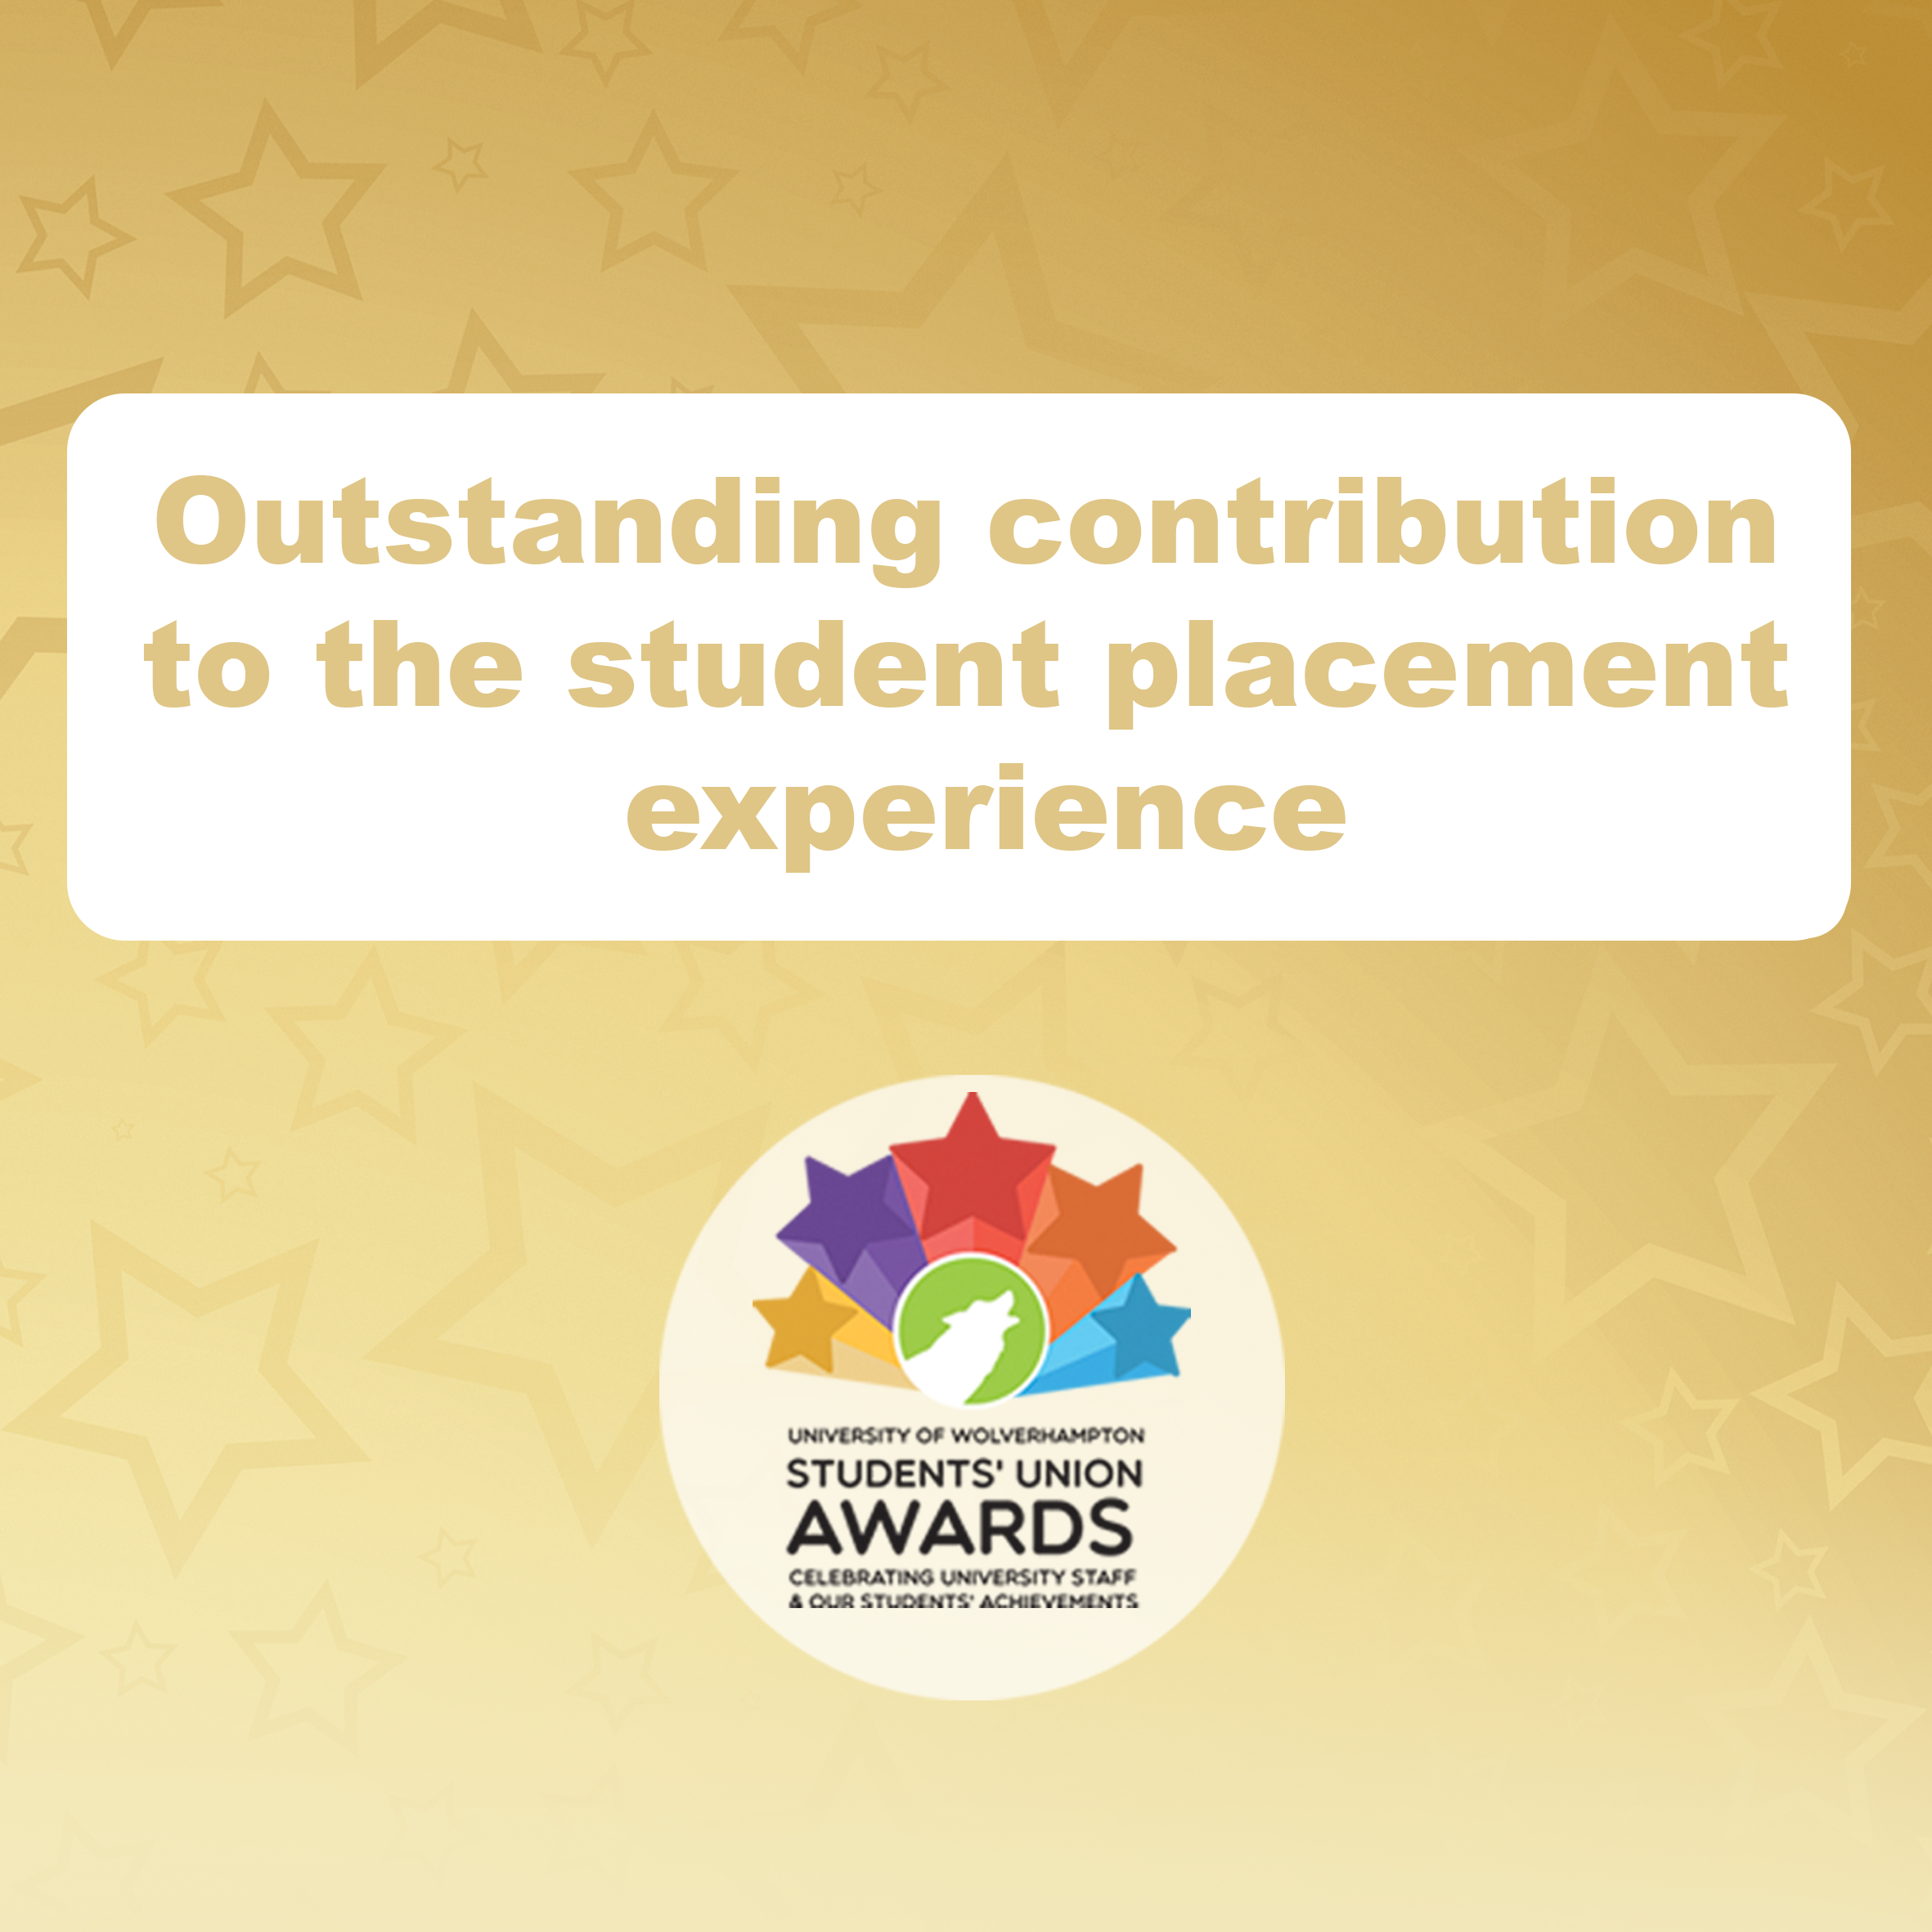 Outstanding contribution to the student placement experience